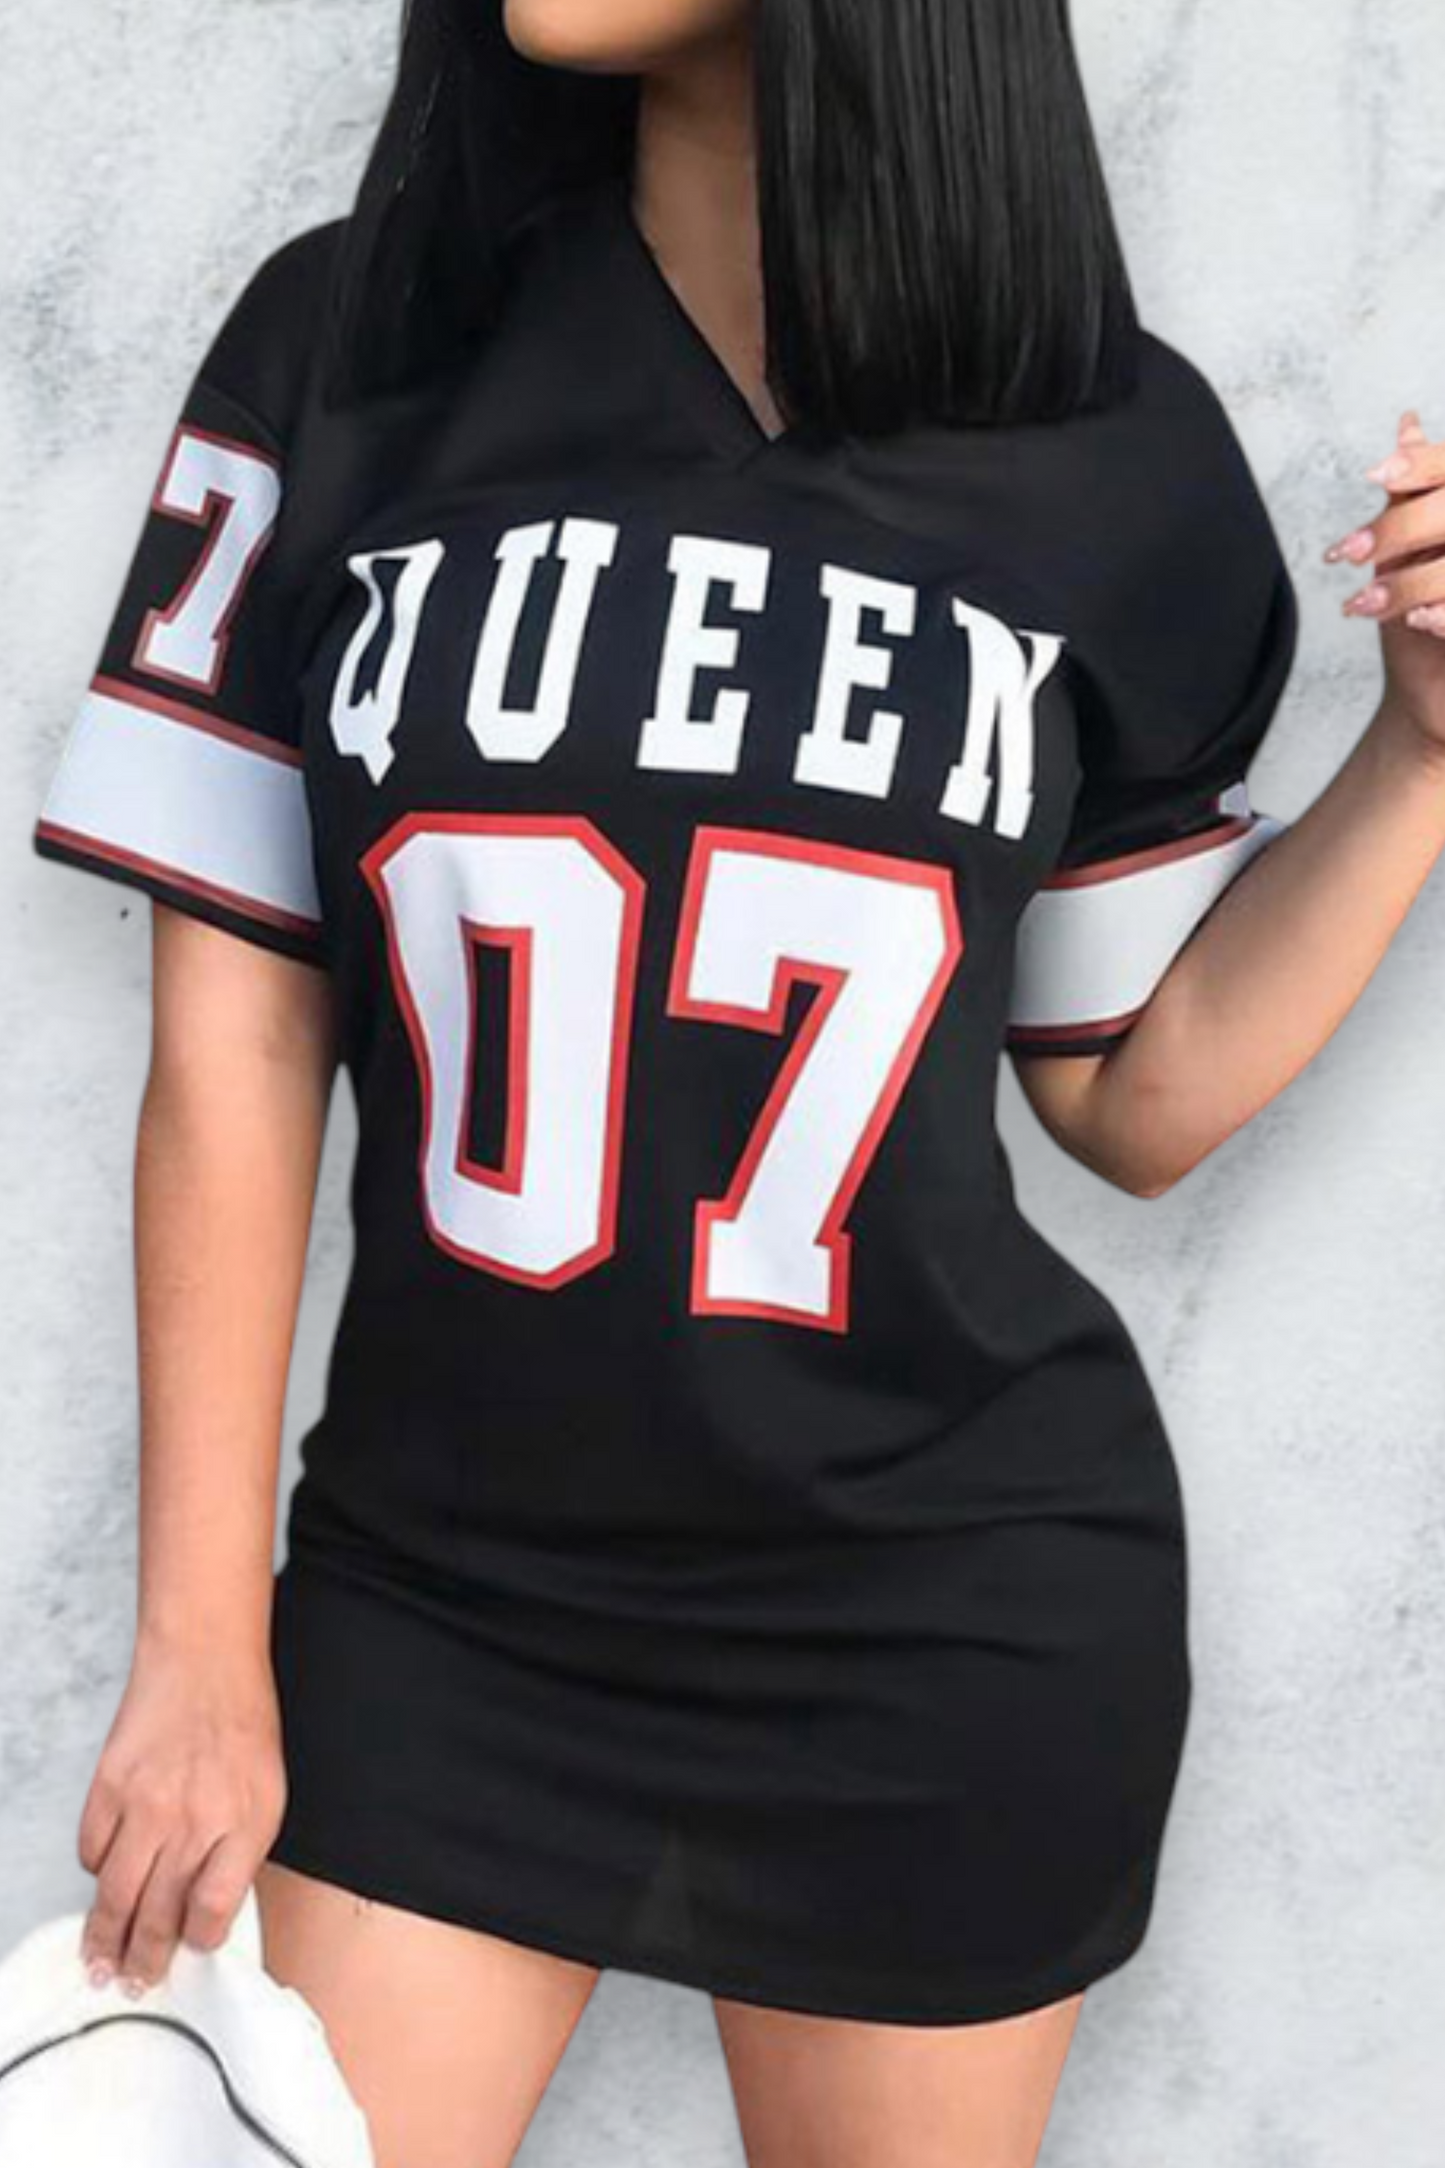 Queen All Day Dress - White